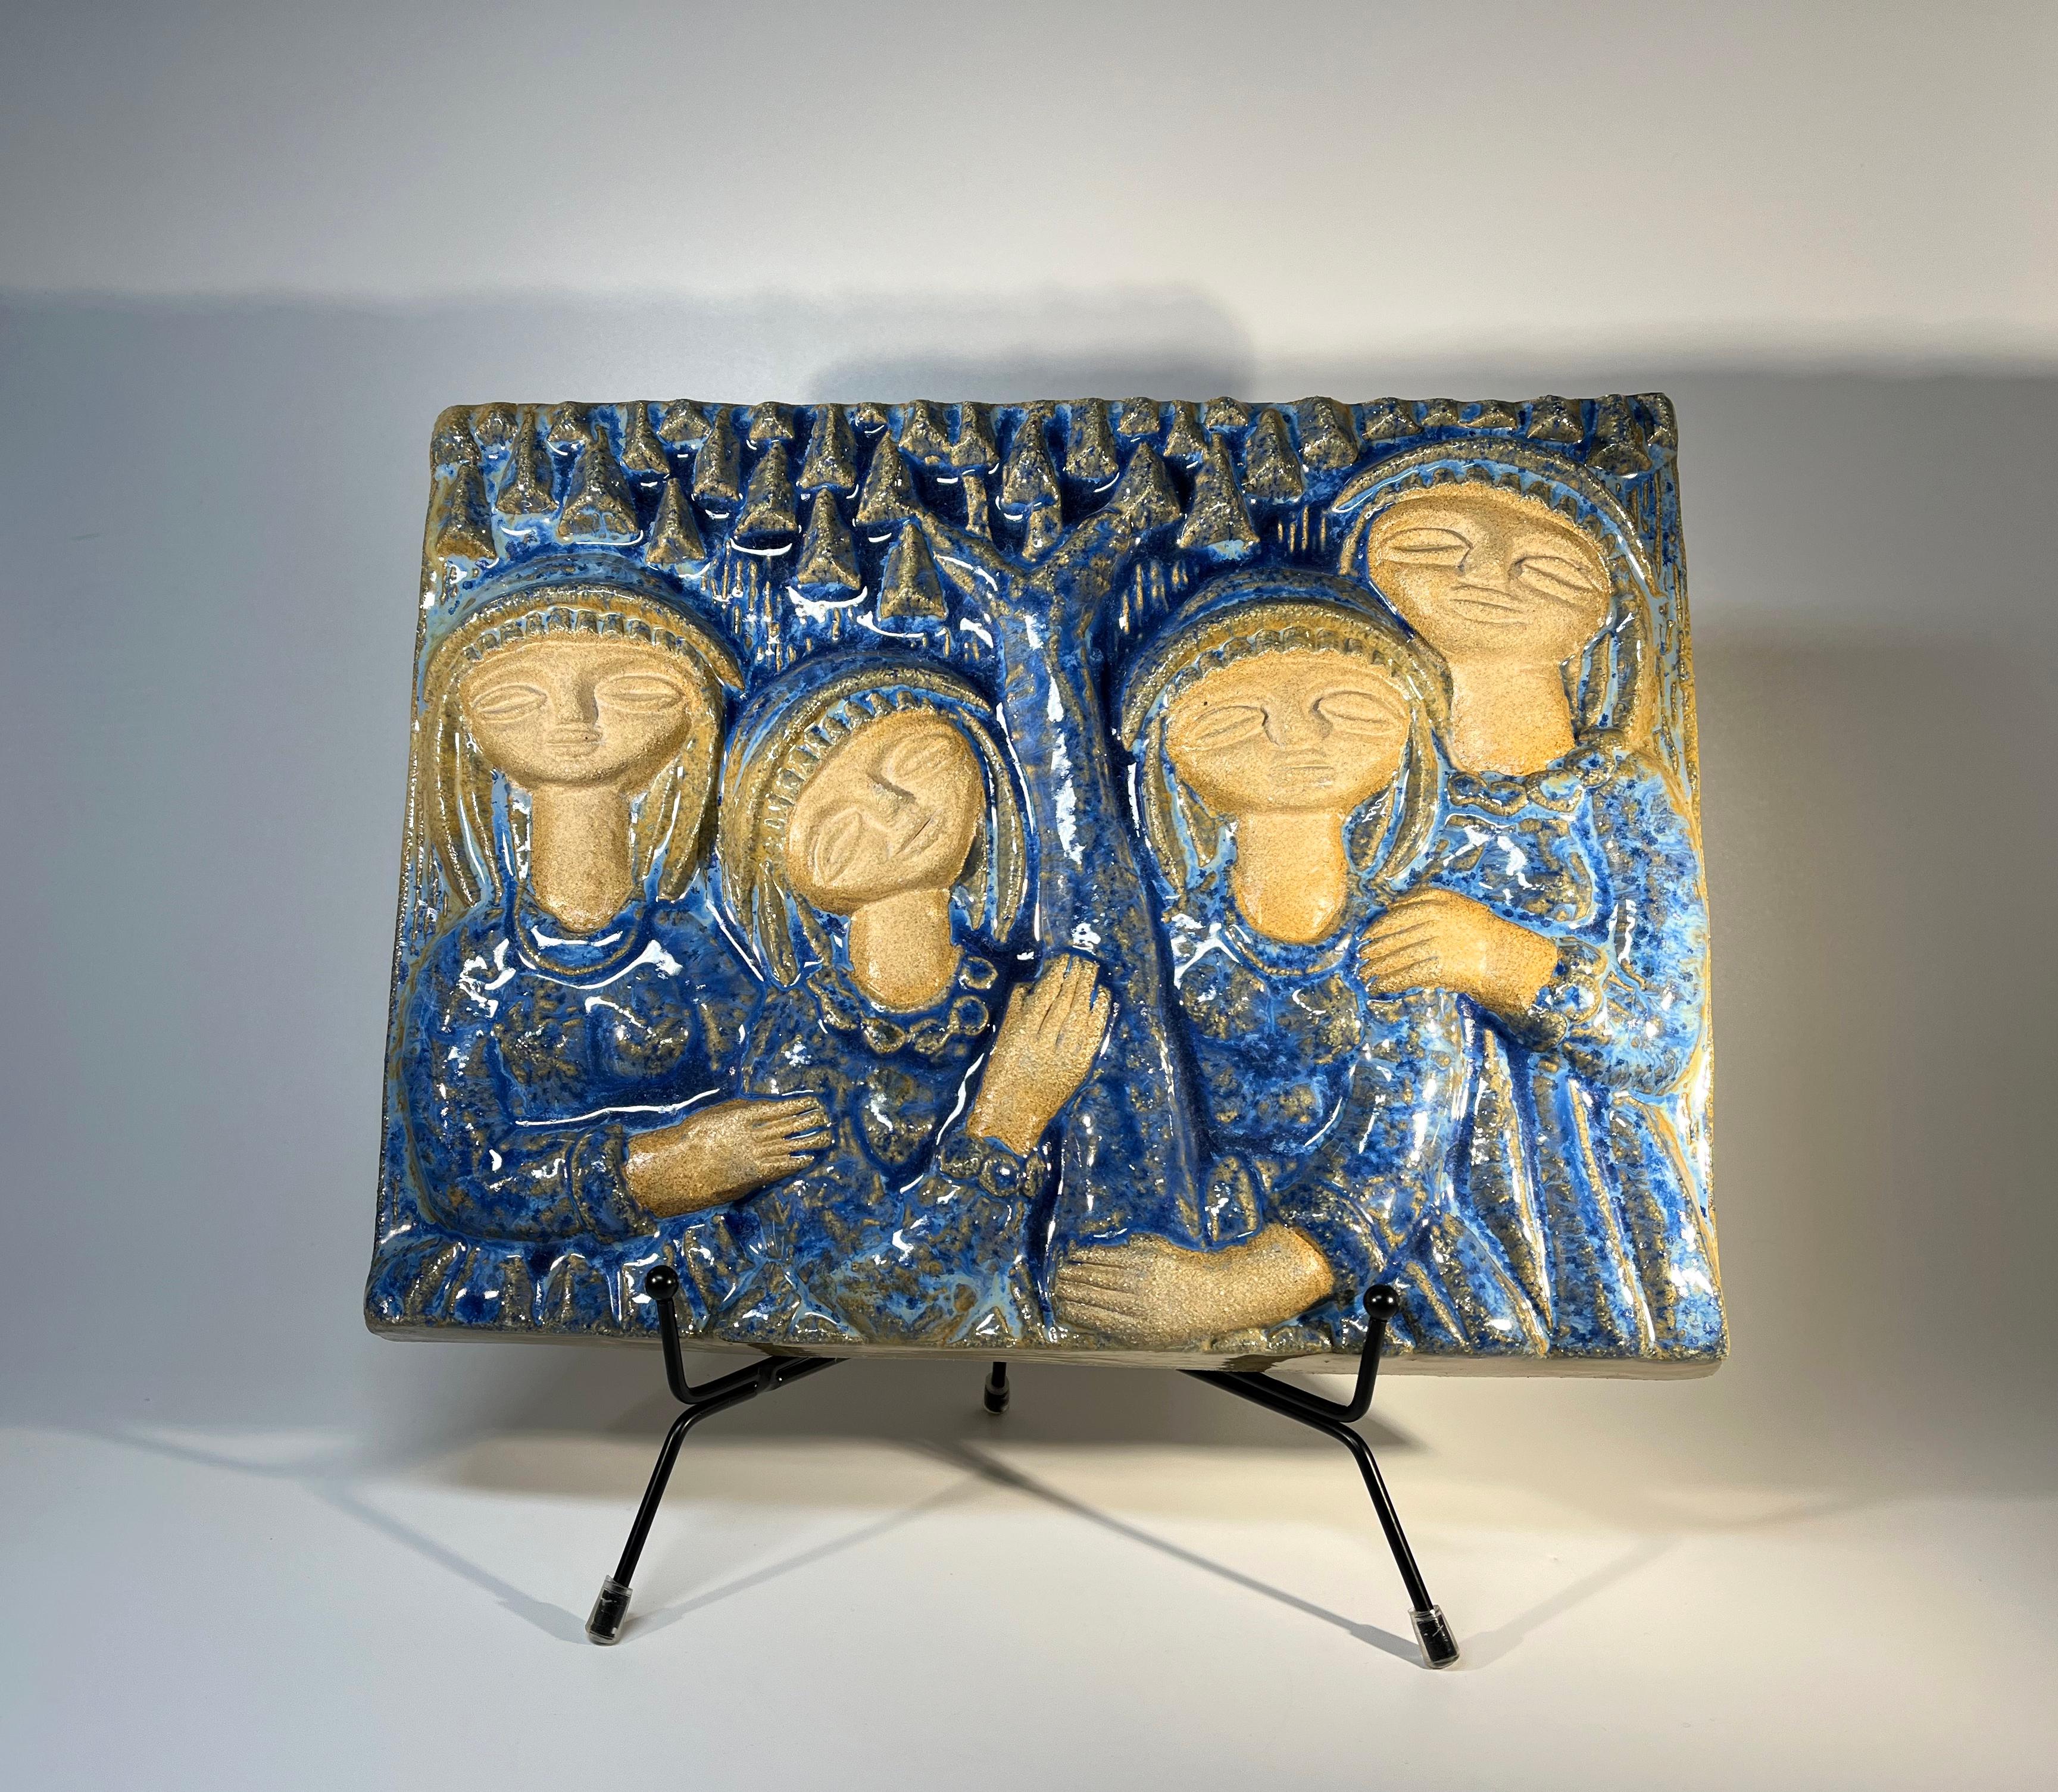 Glazed Blue Ladies By Marianne Starck For Michael Andersen. Danish Wall Plaque For Sale